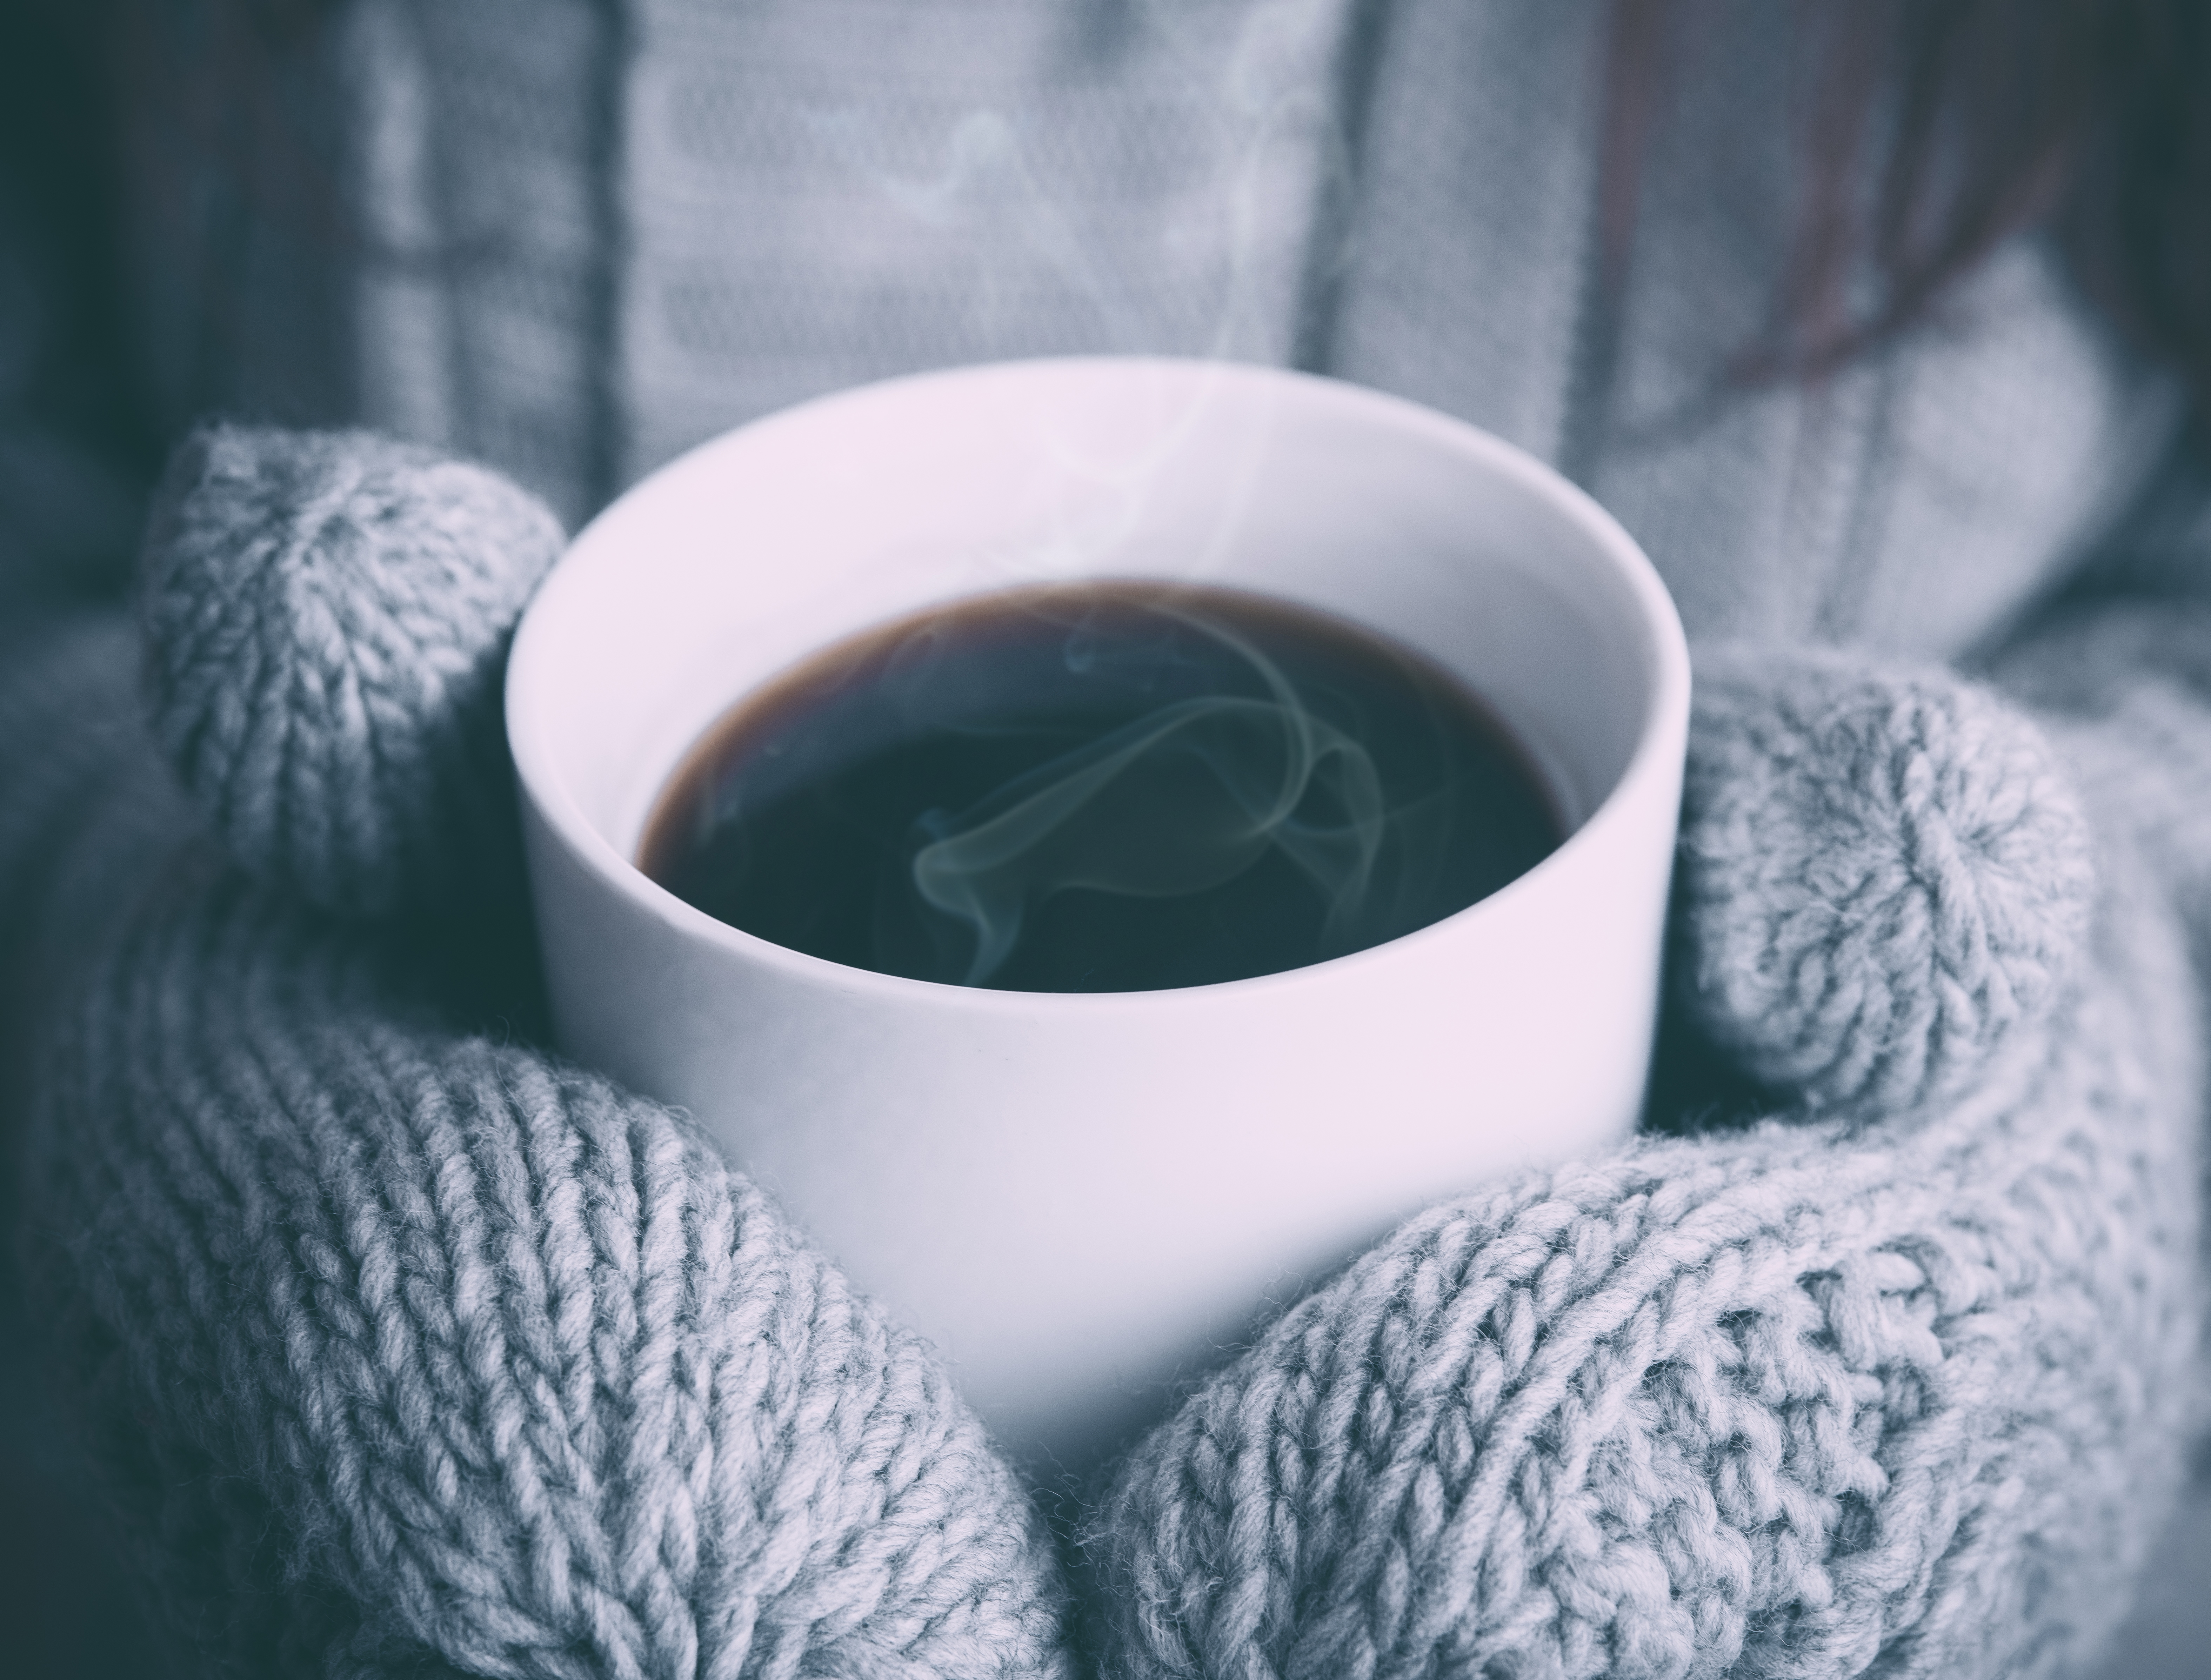 A steaming hot mug of coffee held by someone wearing knitted grey mittens